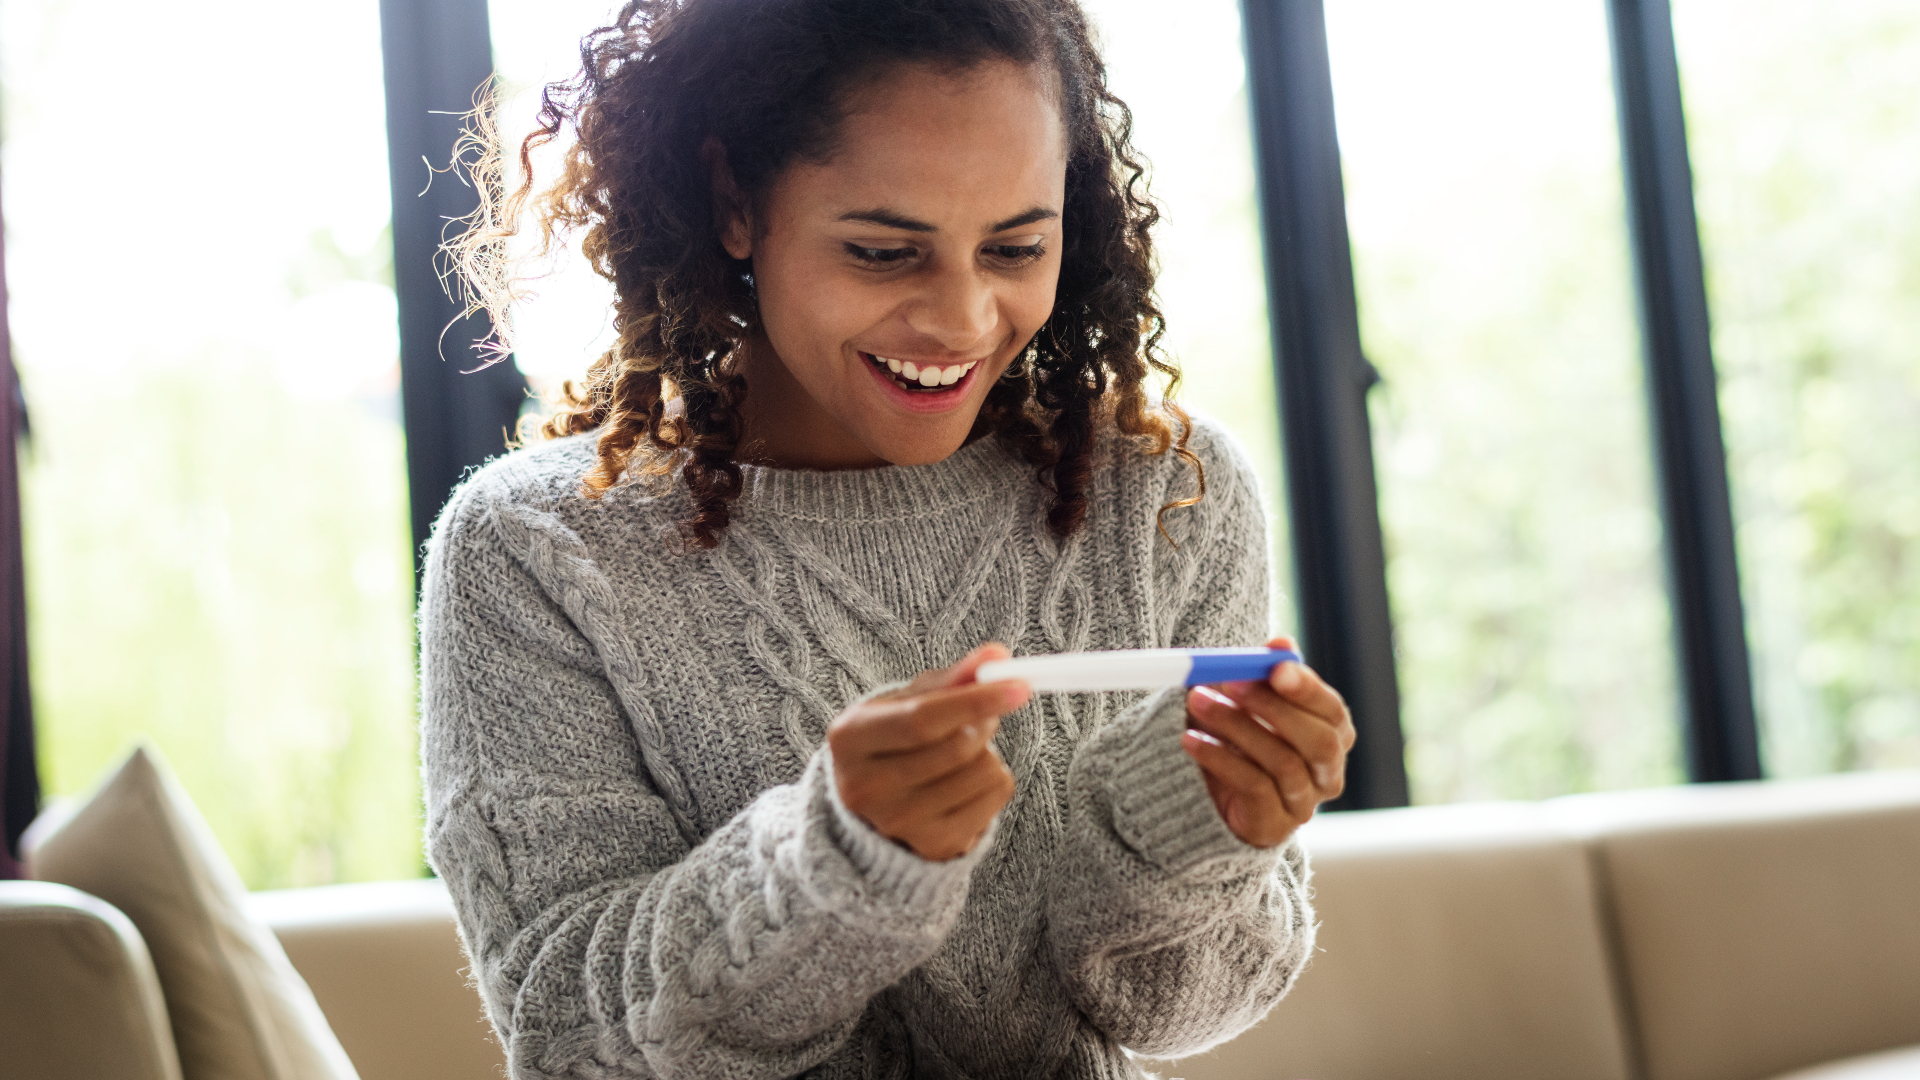 8 Signs of Infertility That Will Keep You Away From Infertility